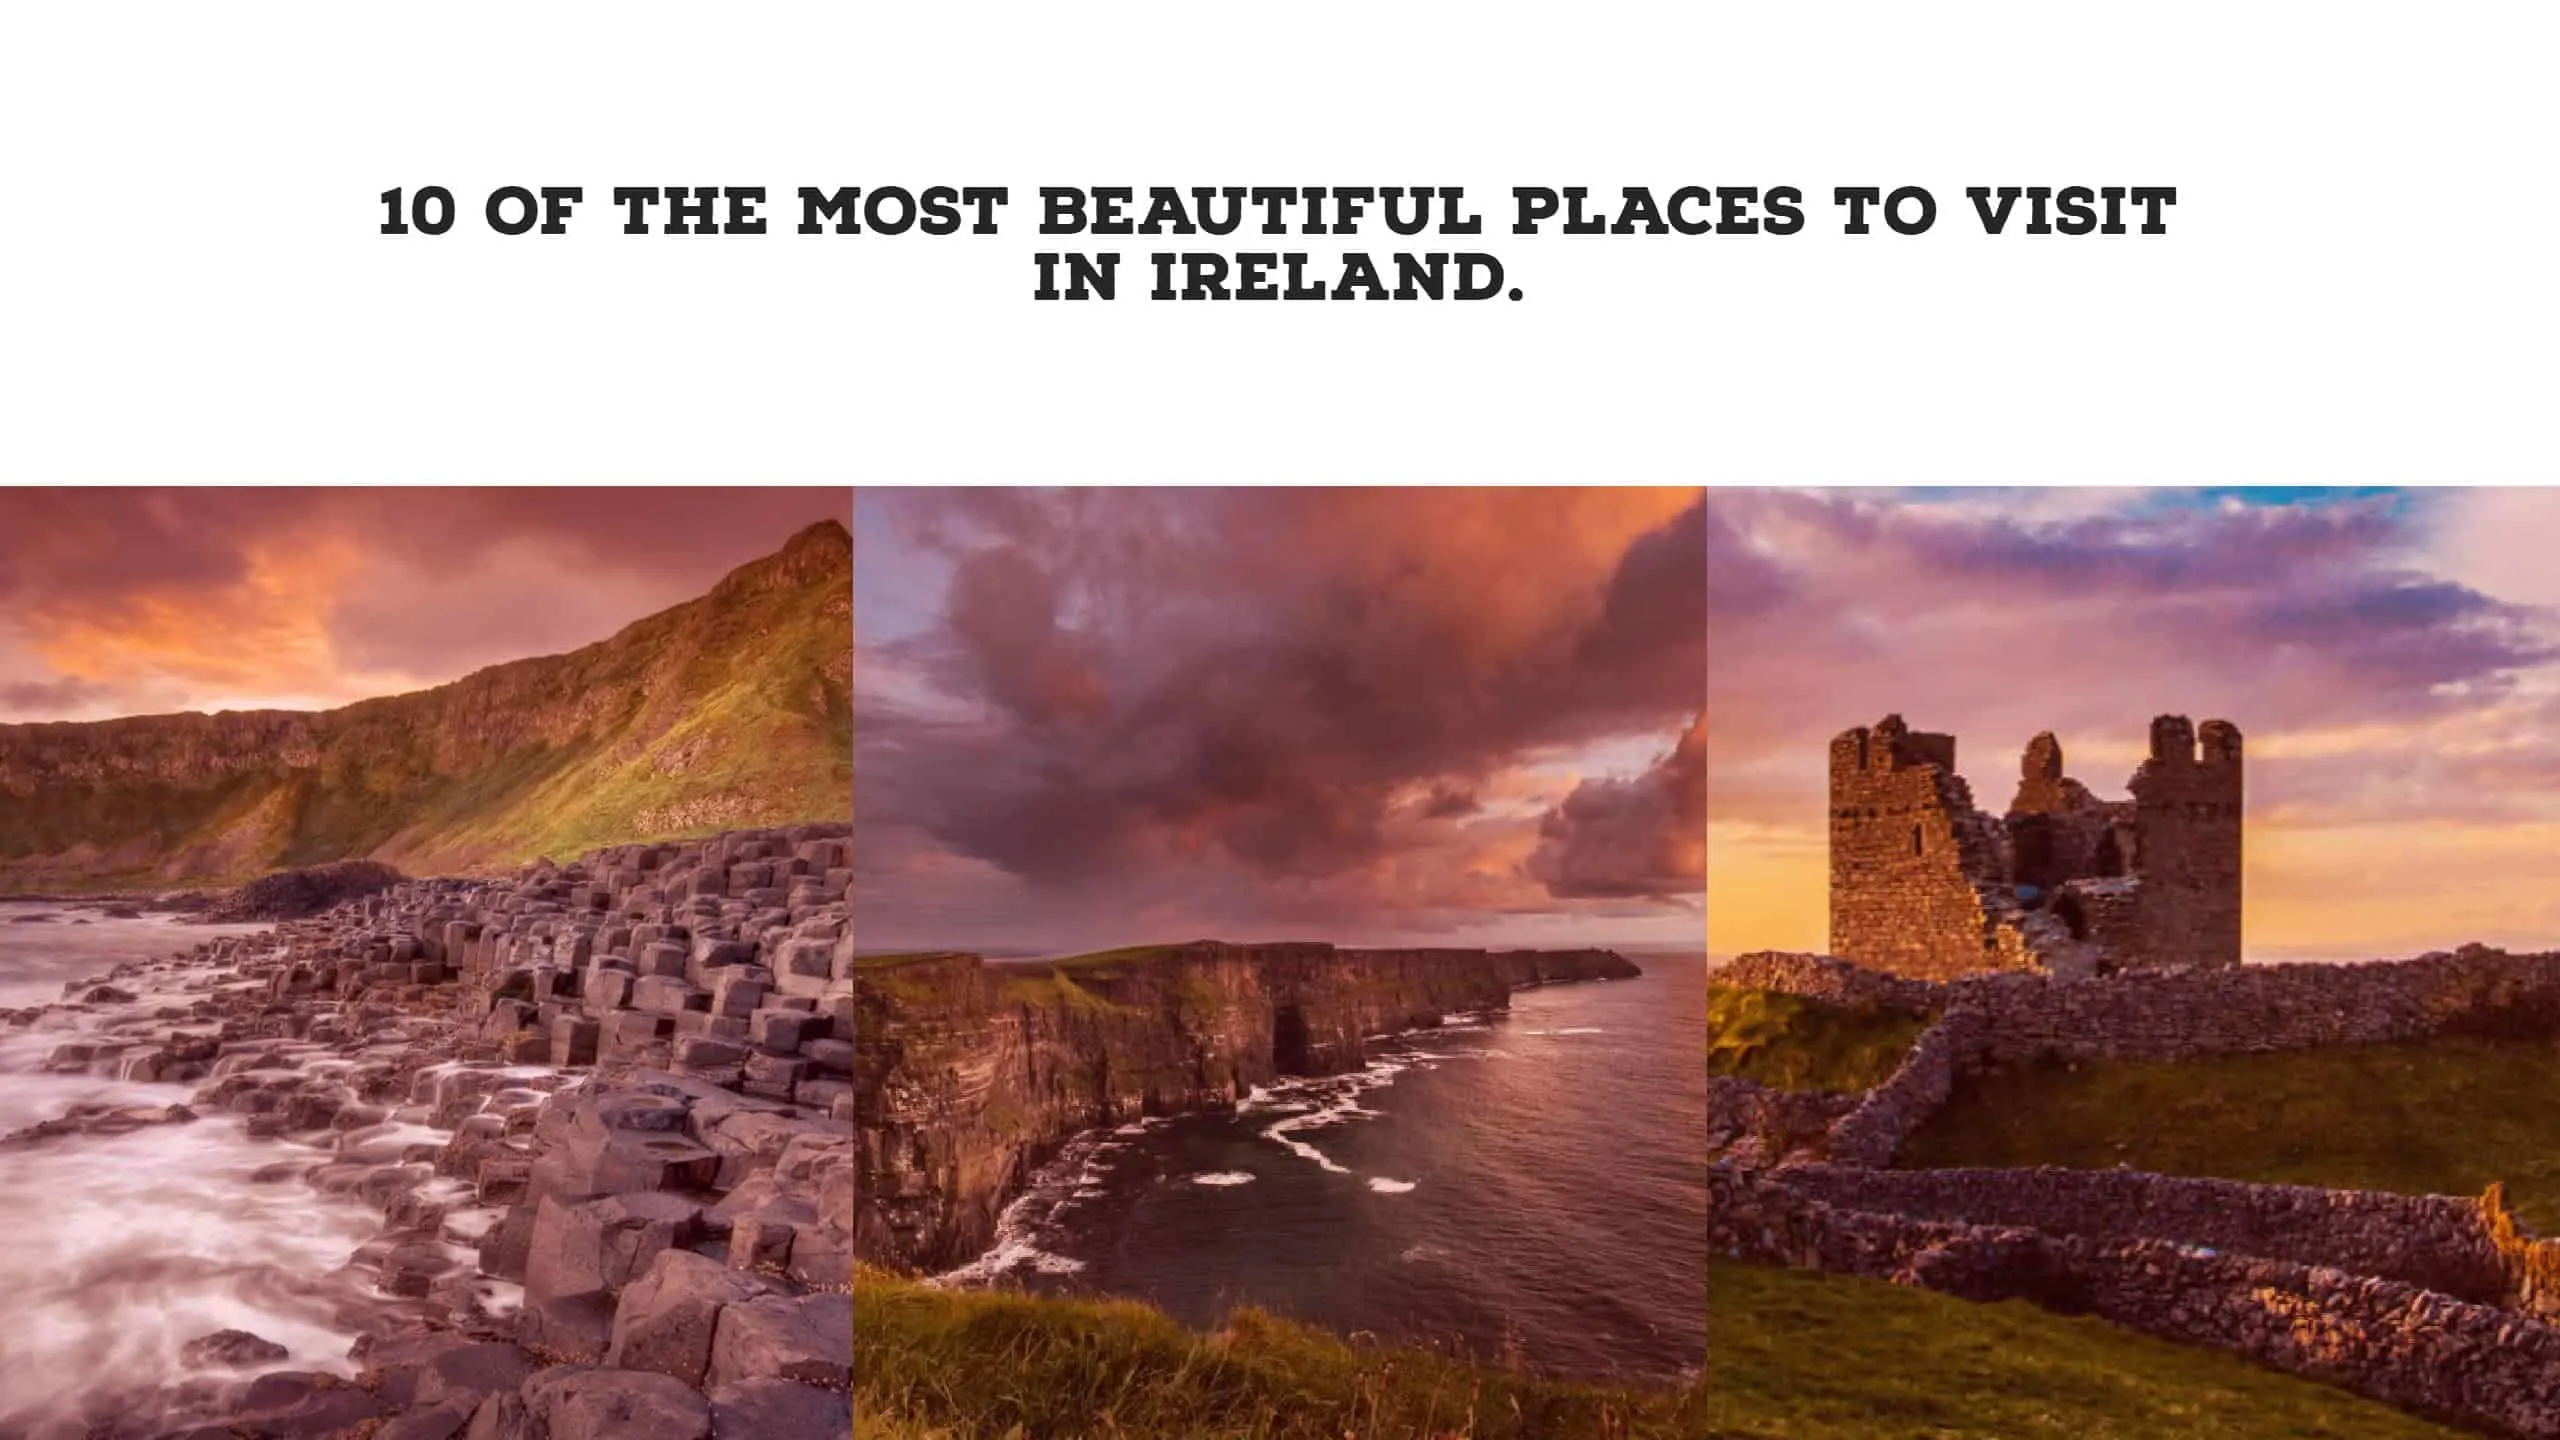 10 Most Beautiful Places To Visit In Ireland.